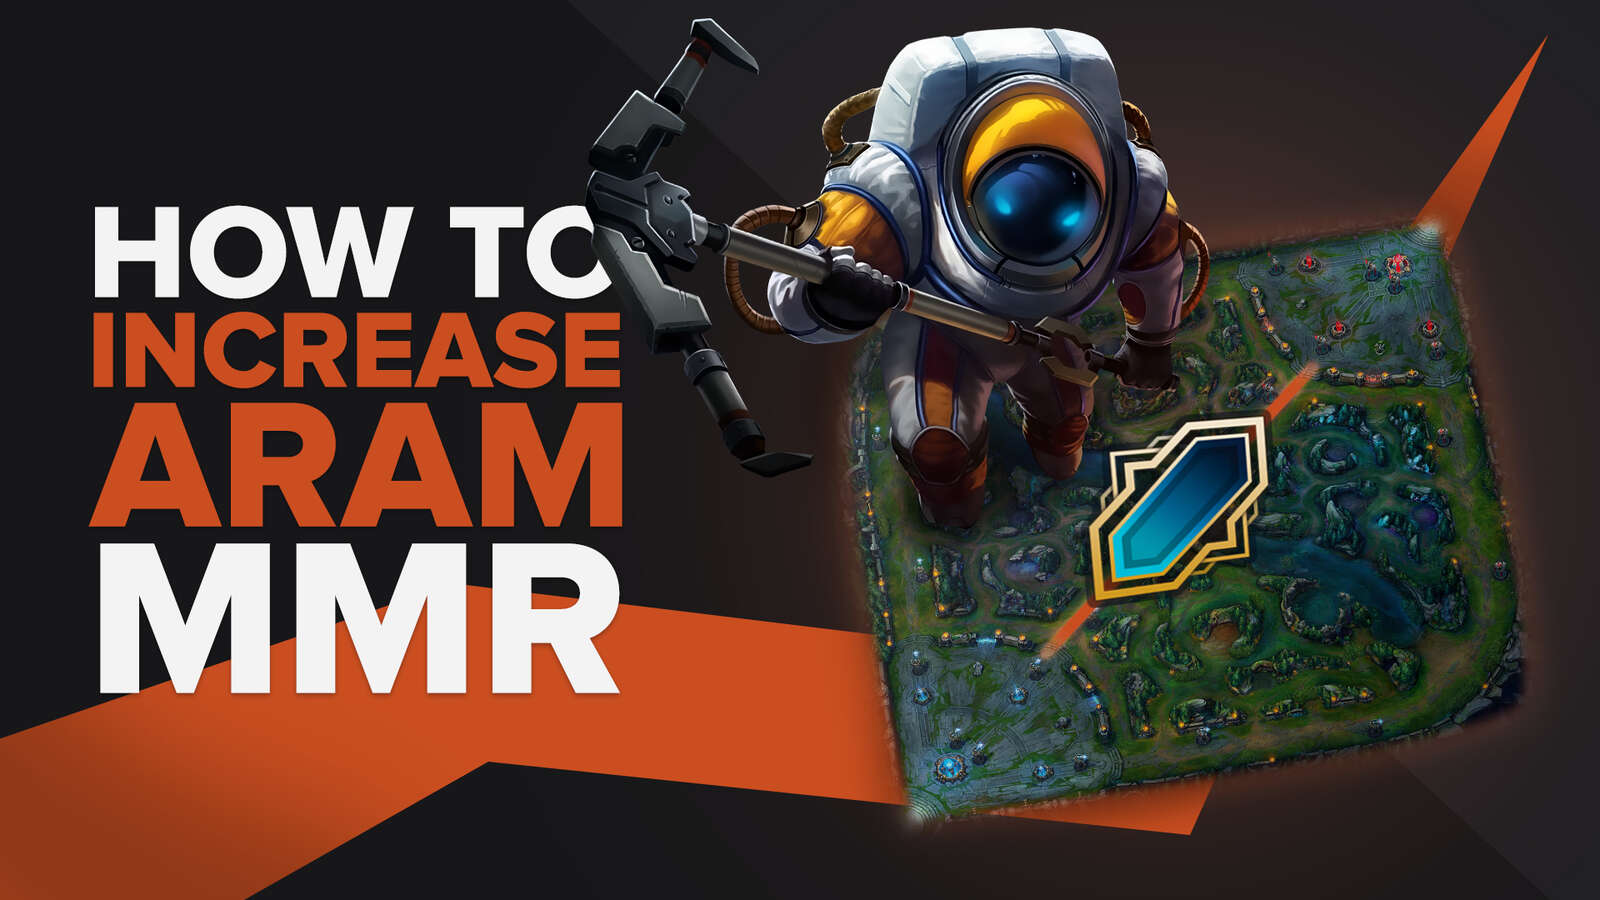 How to Increase Aram MMR in League of Legends